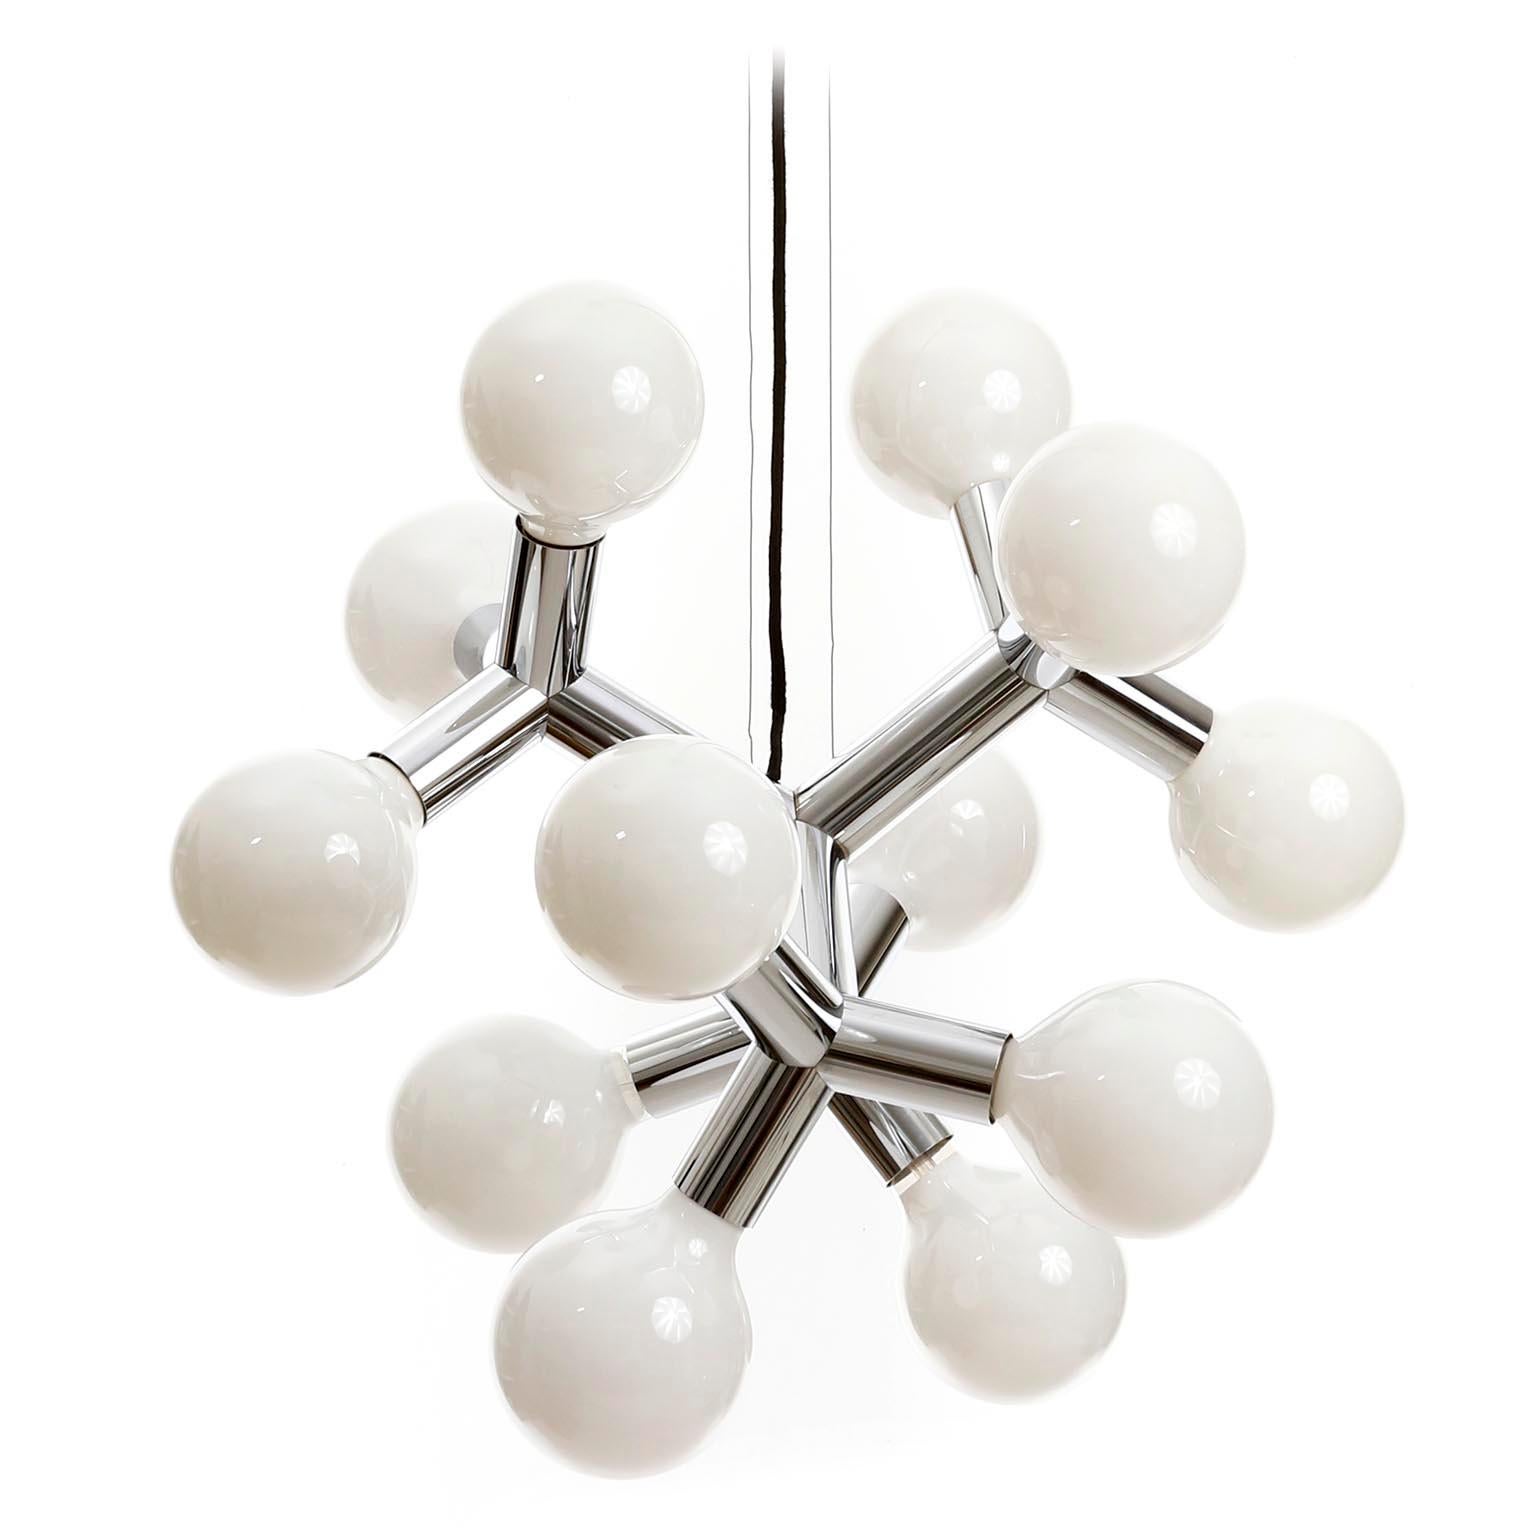 Late 20th Century Atomic Pendant Light Chandelier by Kalmar, Polished Chrome, 1970s, One of Four For Sale